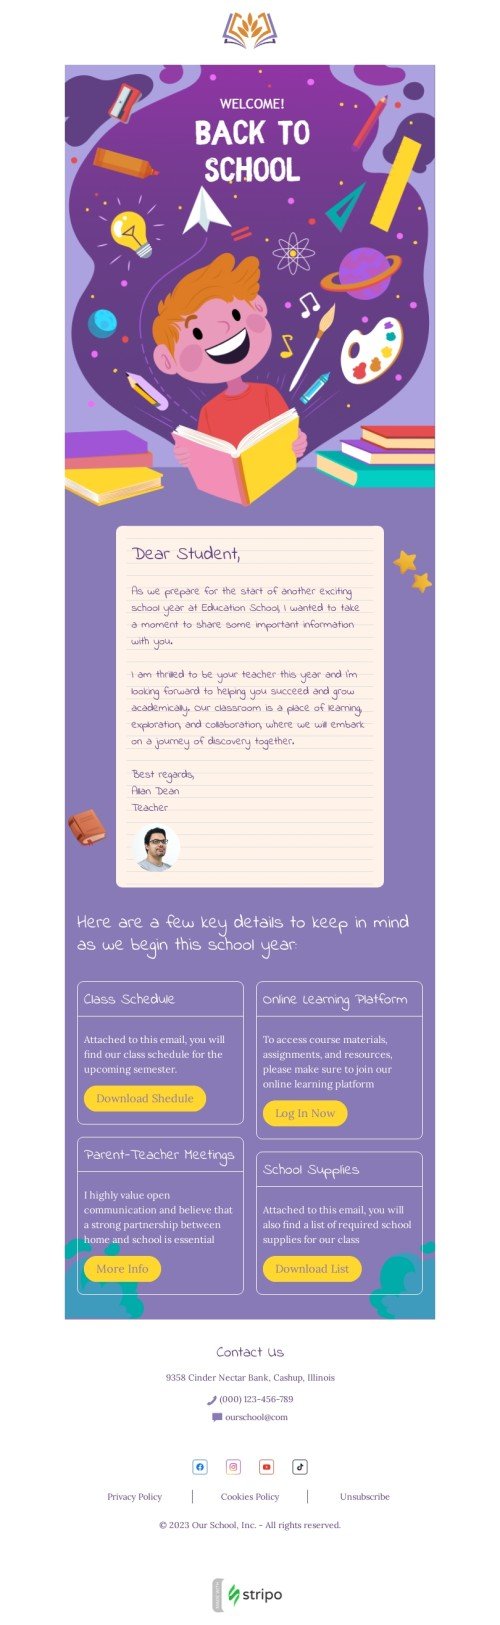 Back to school email template "Important information inside" for education industry desktop view